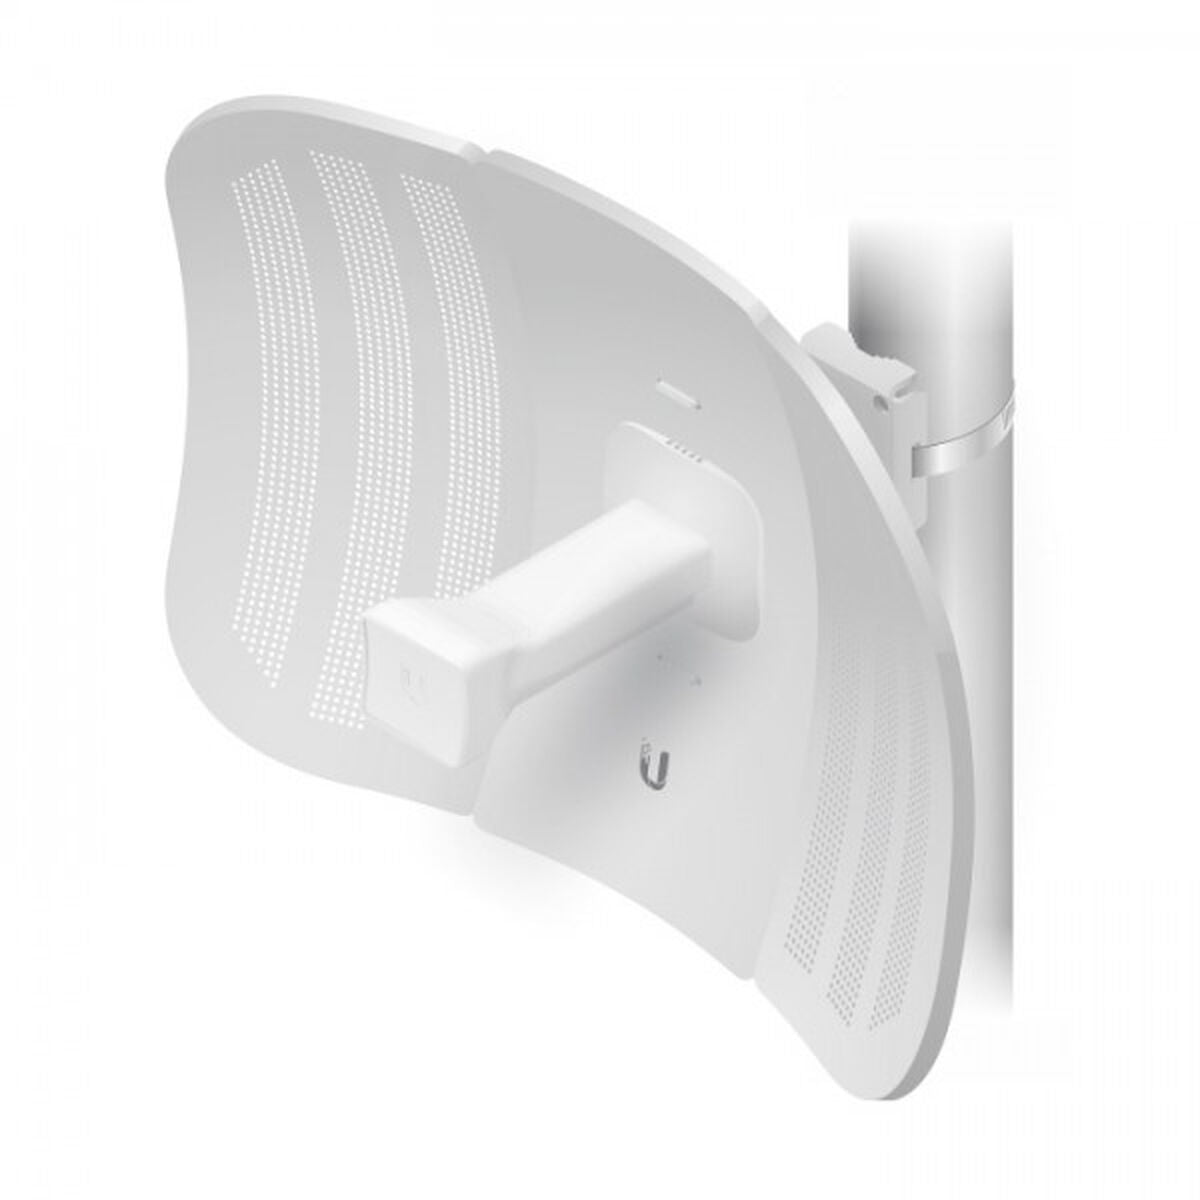 Access point UBIQUITI LBE-M5-23 100 Mbps, UBIQUITI, Computing, Network devices, access-point-ubiquiti-lbe-m5-23-100-mbps, Brand_UBIQUITI, category-reference-2609, category-reference-2803, category-reference-2820, category-reference-t-19685, category-reference-t-19914, category-reference-t-21370, Condition_NEW, ferretería, networks/wiring, Price_50 - 100, Teleworking, RiotNook